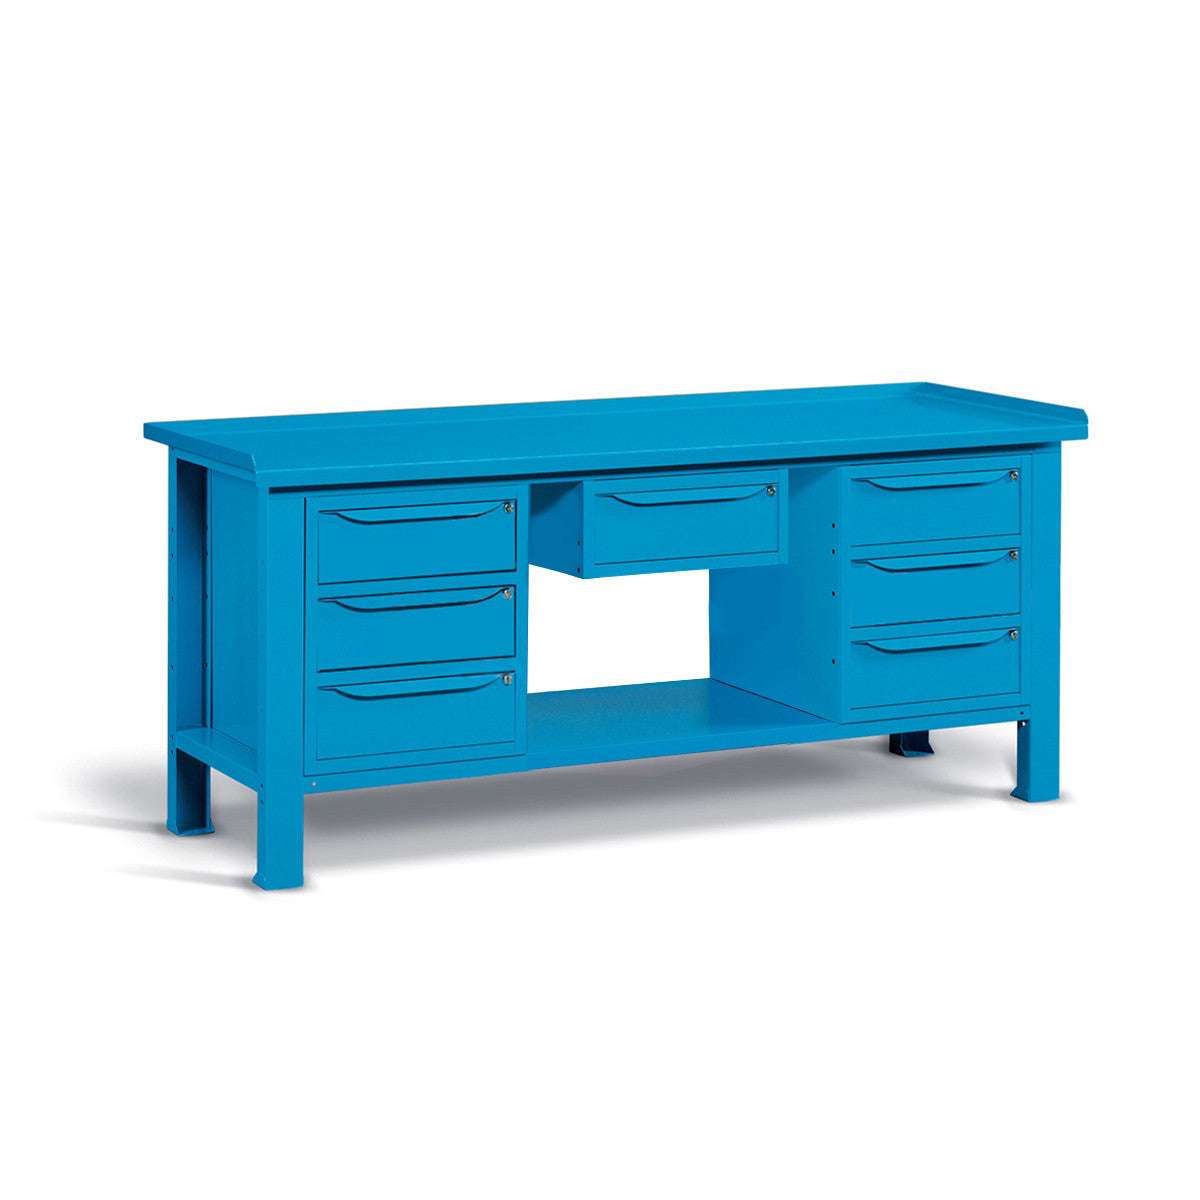 WORKSHOP WORKBENCH STEEL TOP 2007 x 705 x 855 H - 2 CABINETS 3 DRAWERS + 1 CABINET 1 DRAWER - FAMI - BLUE